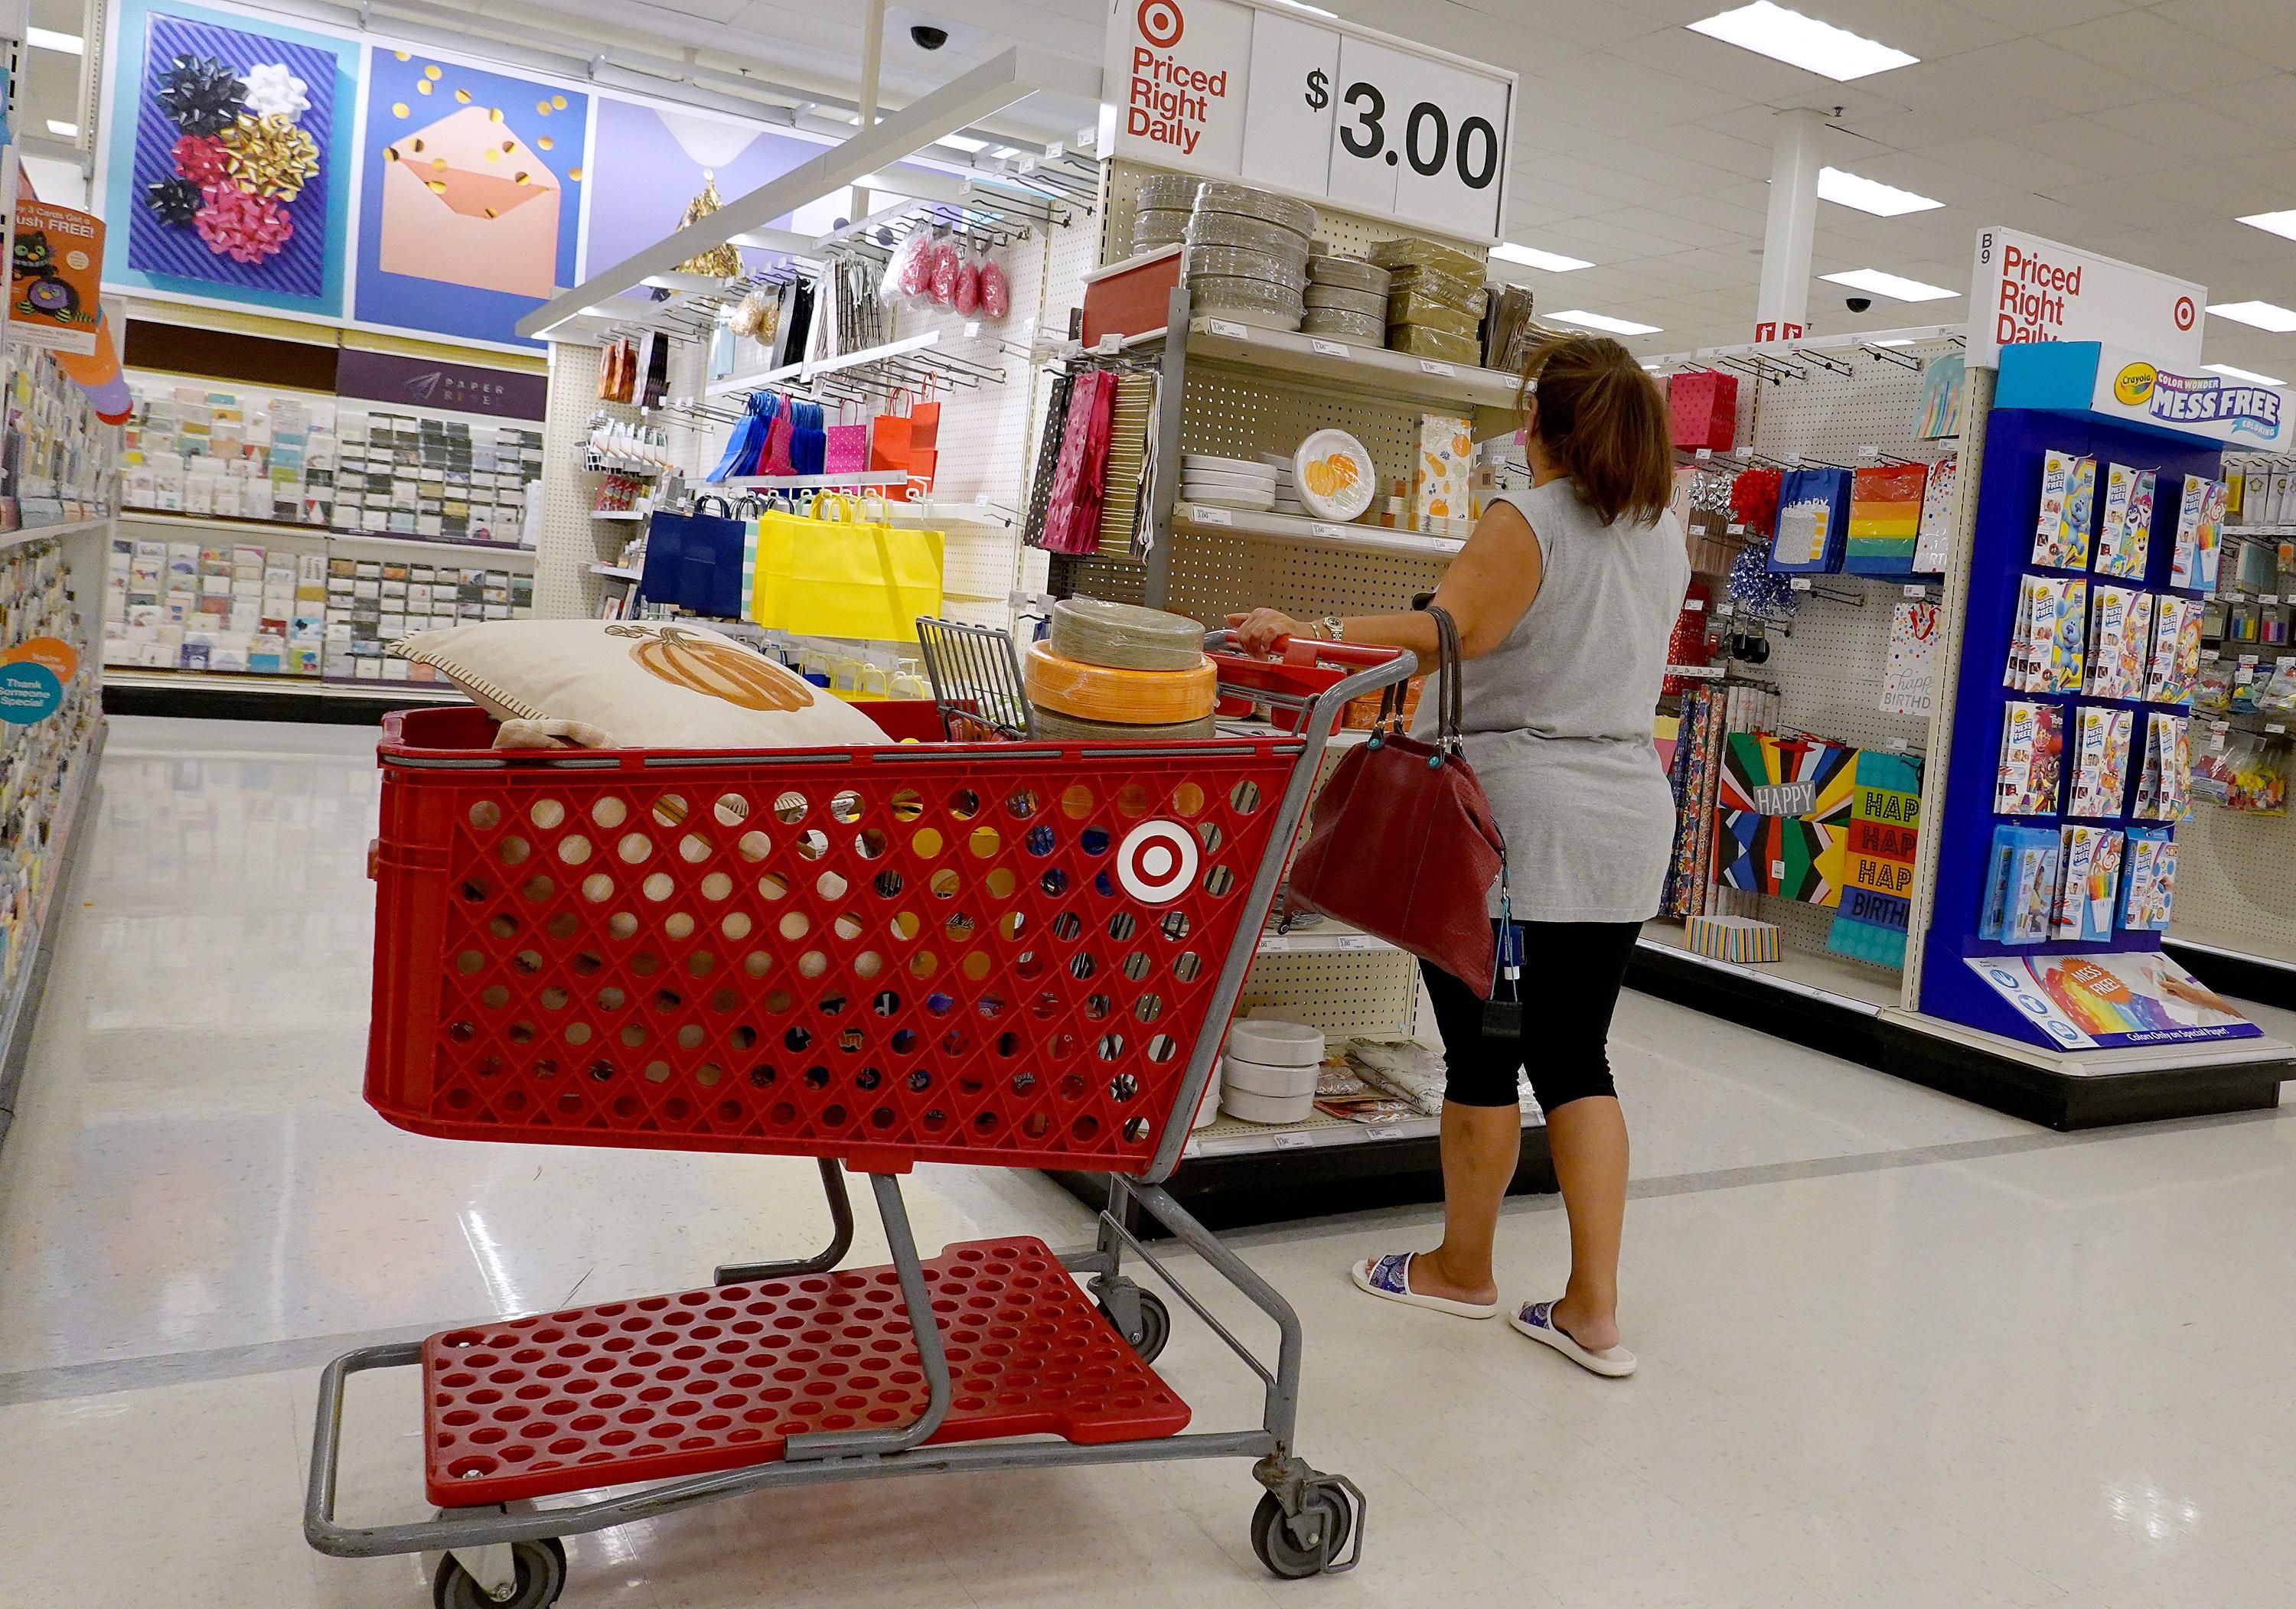 A shopper looks at a price tag at Target.